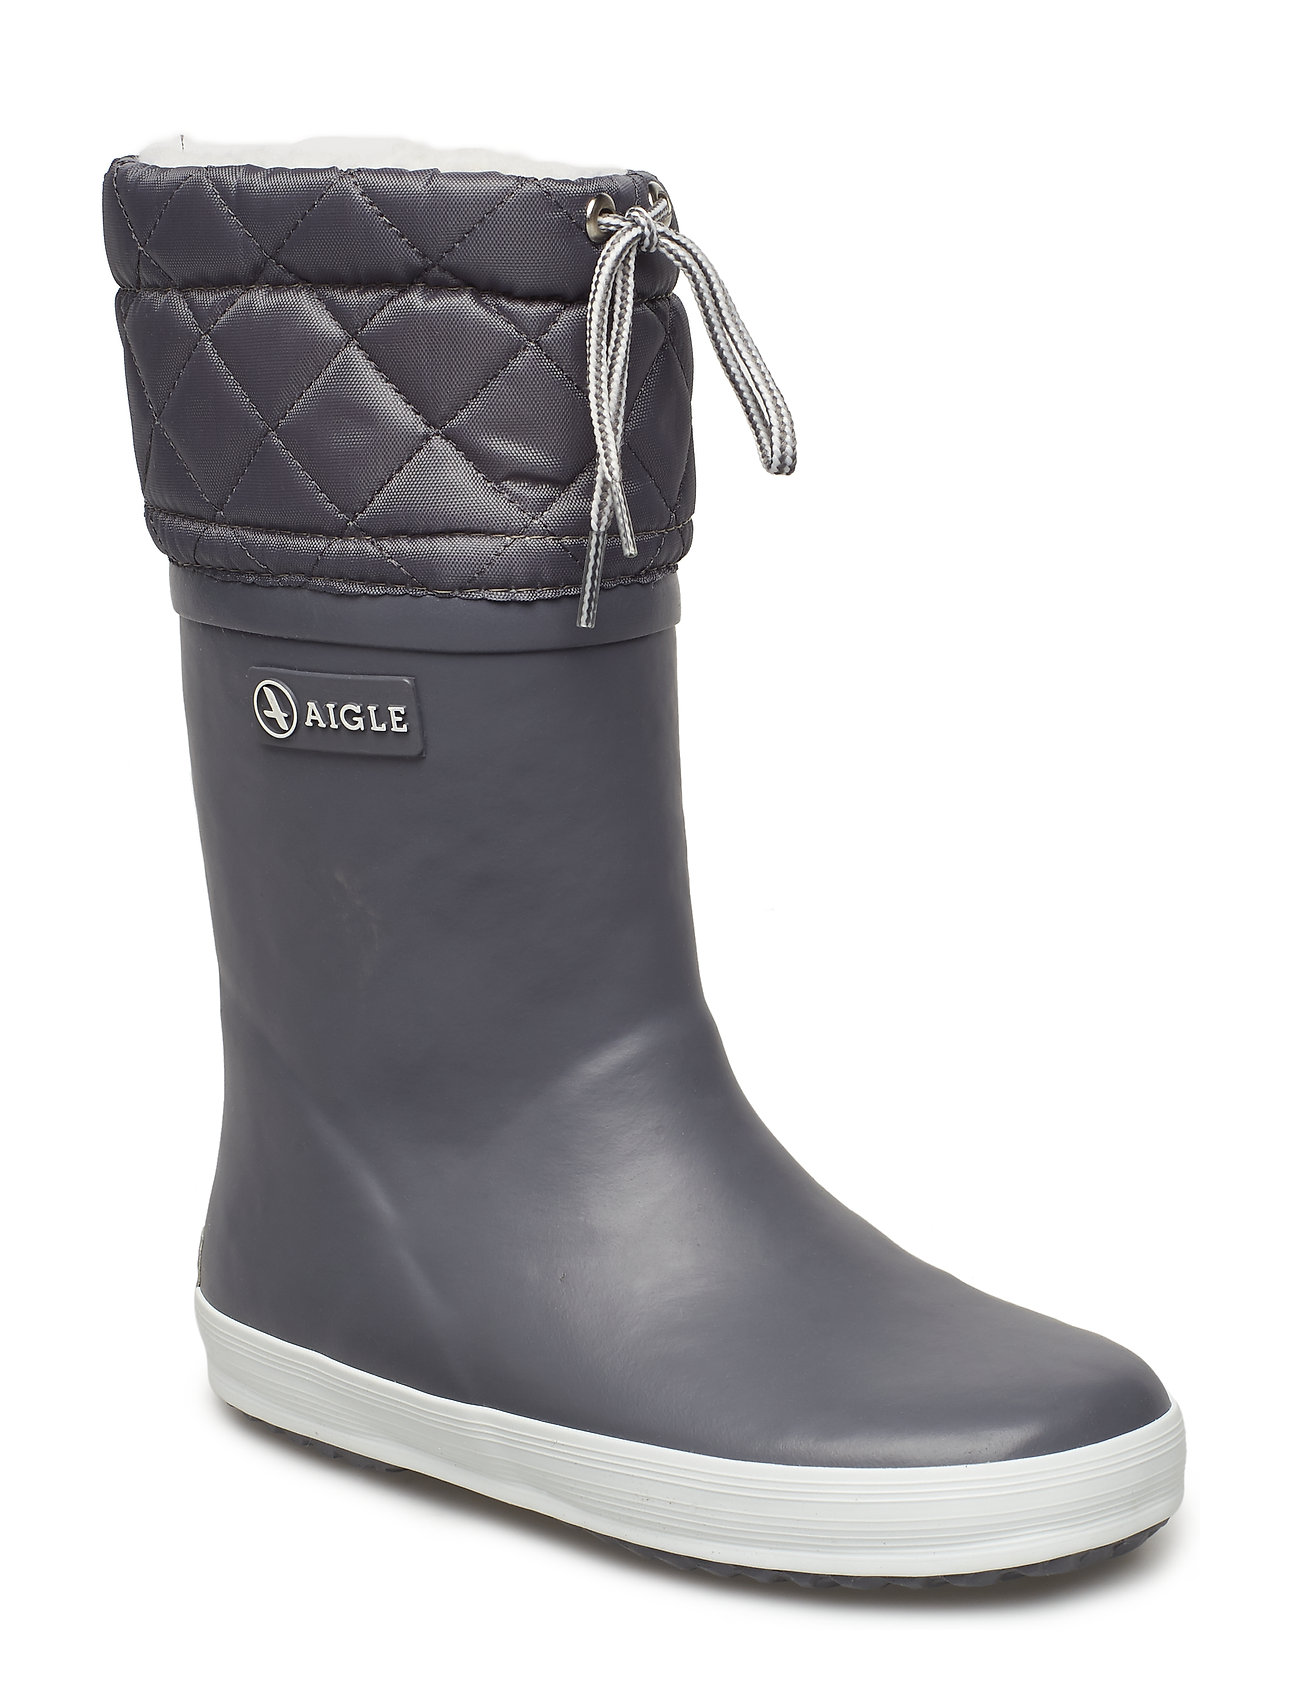 Ai Giboulee Charcoal/Gris Shoes Rubberboots Lined Rubberboots Harmaa Aigle